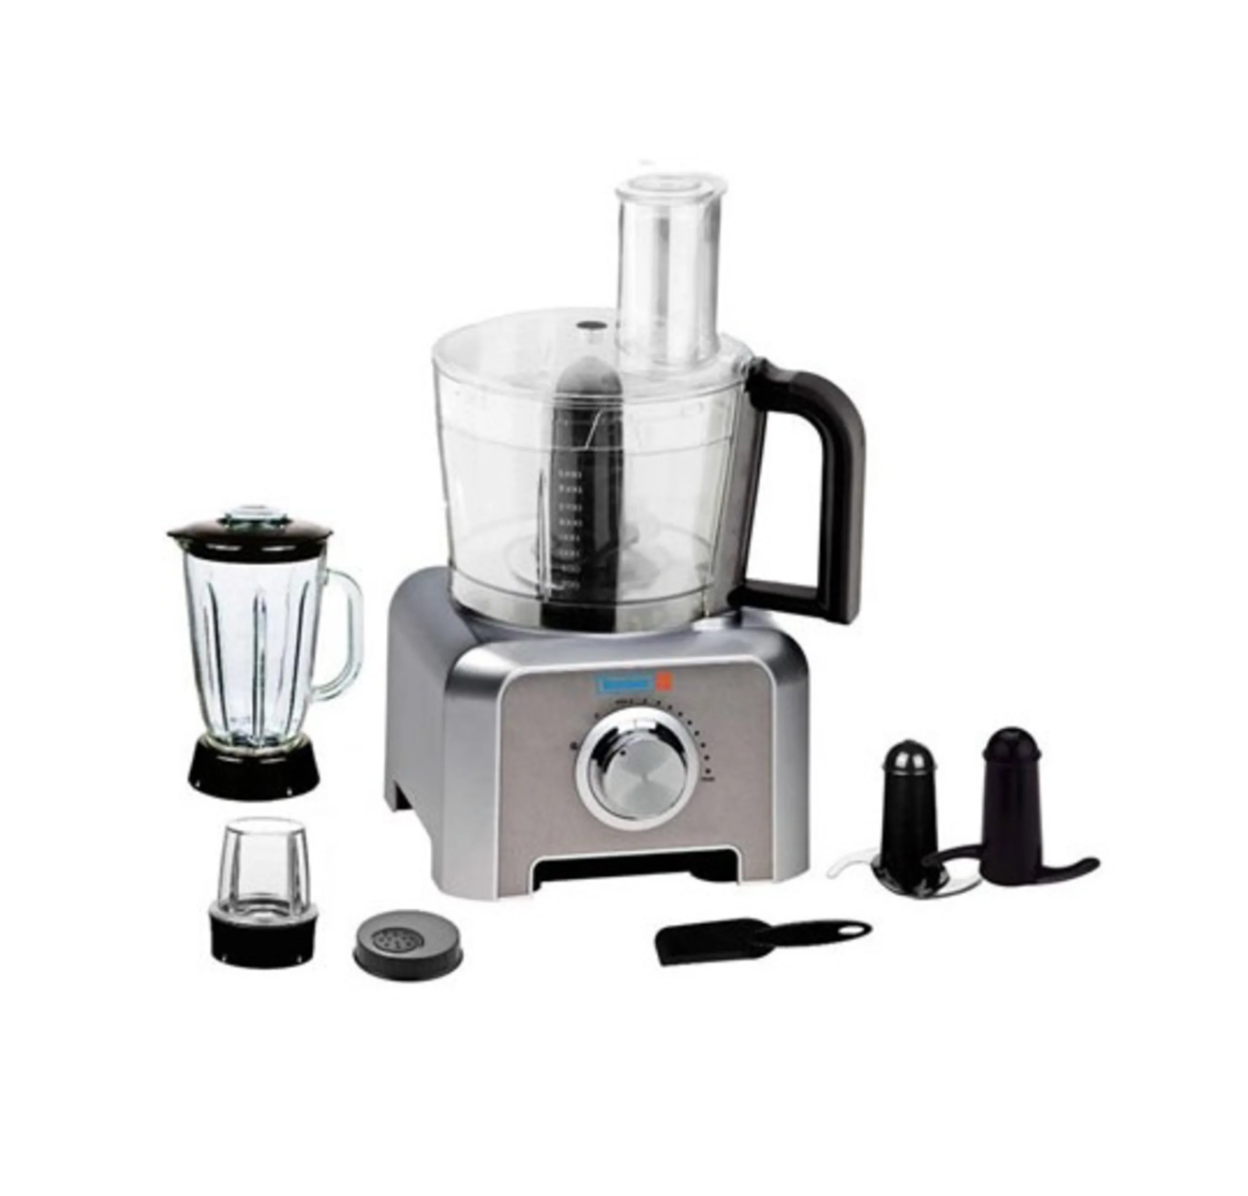 Scanfrost SFKAFP2001 1.7 litres Food Processor With Blender